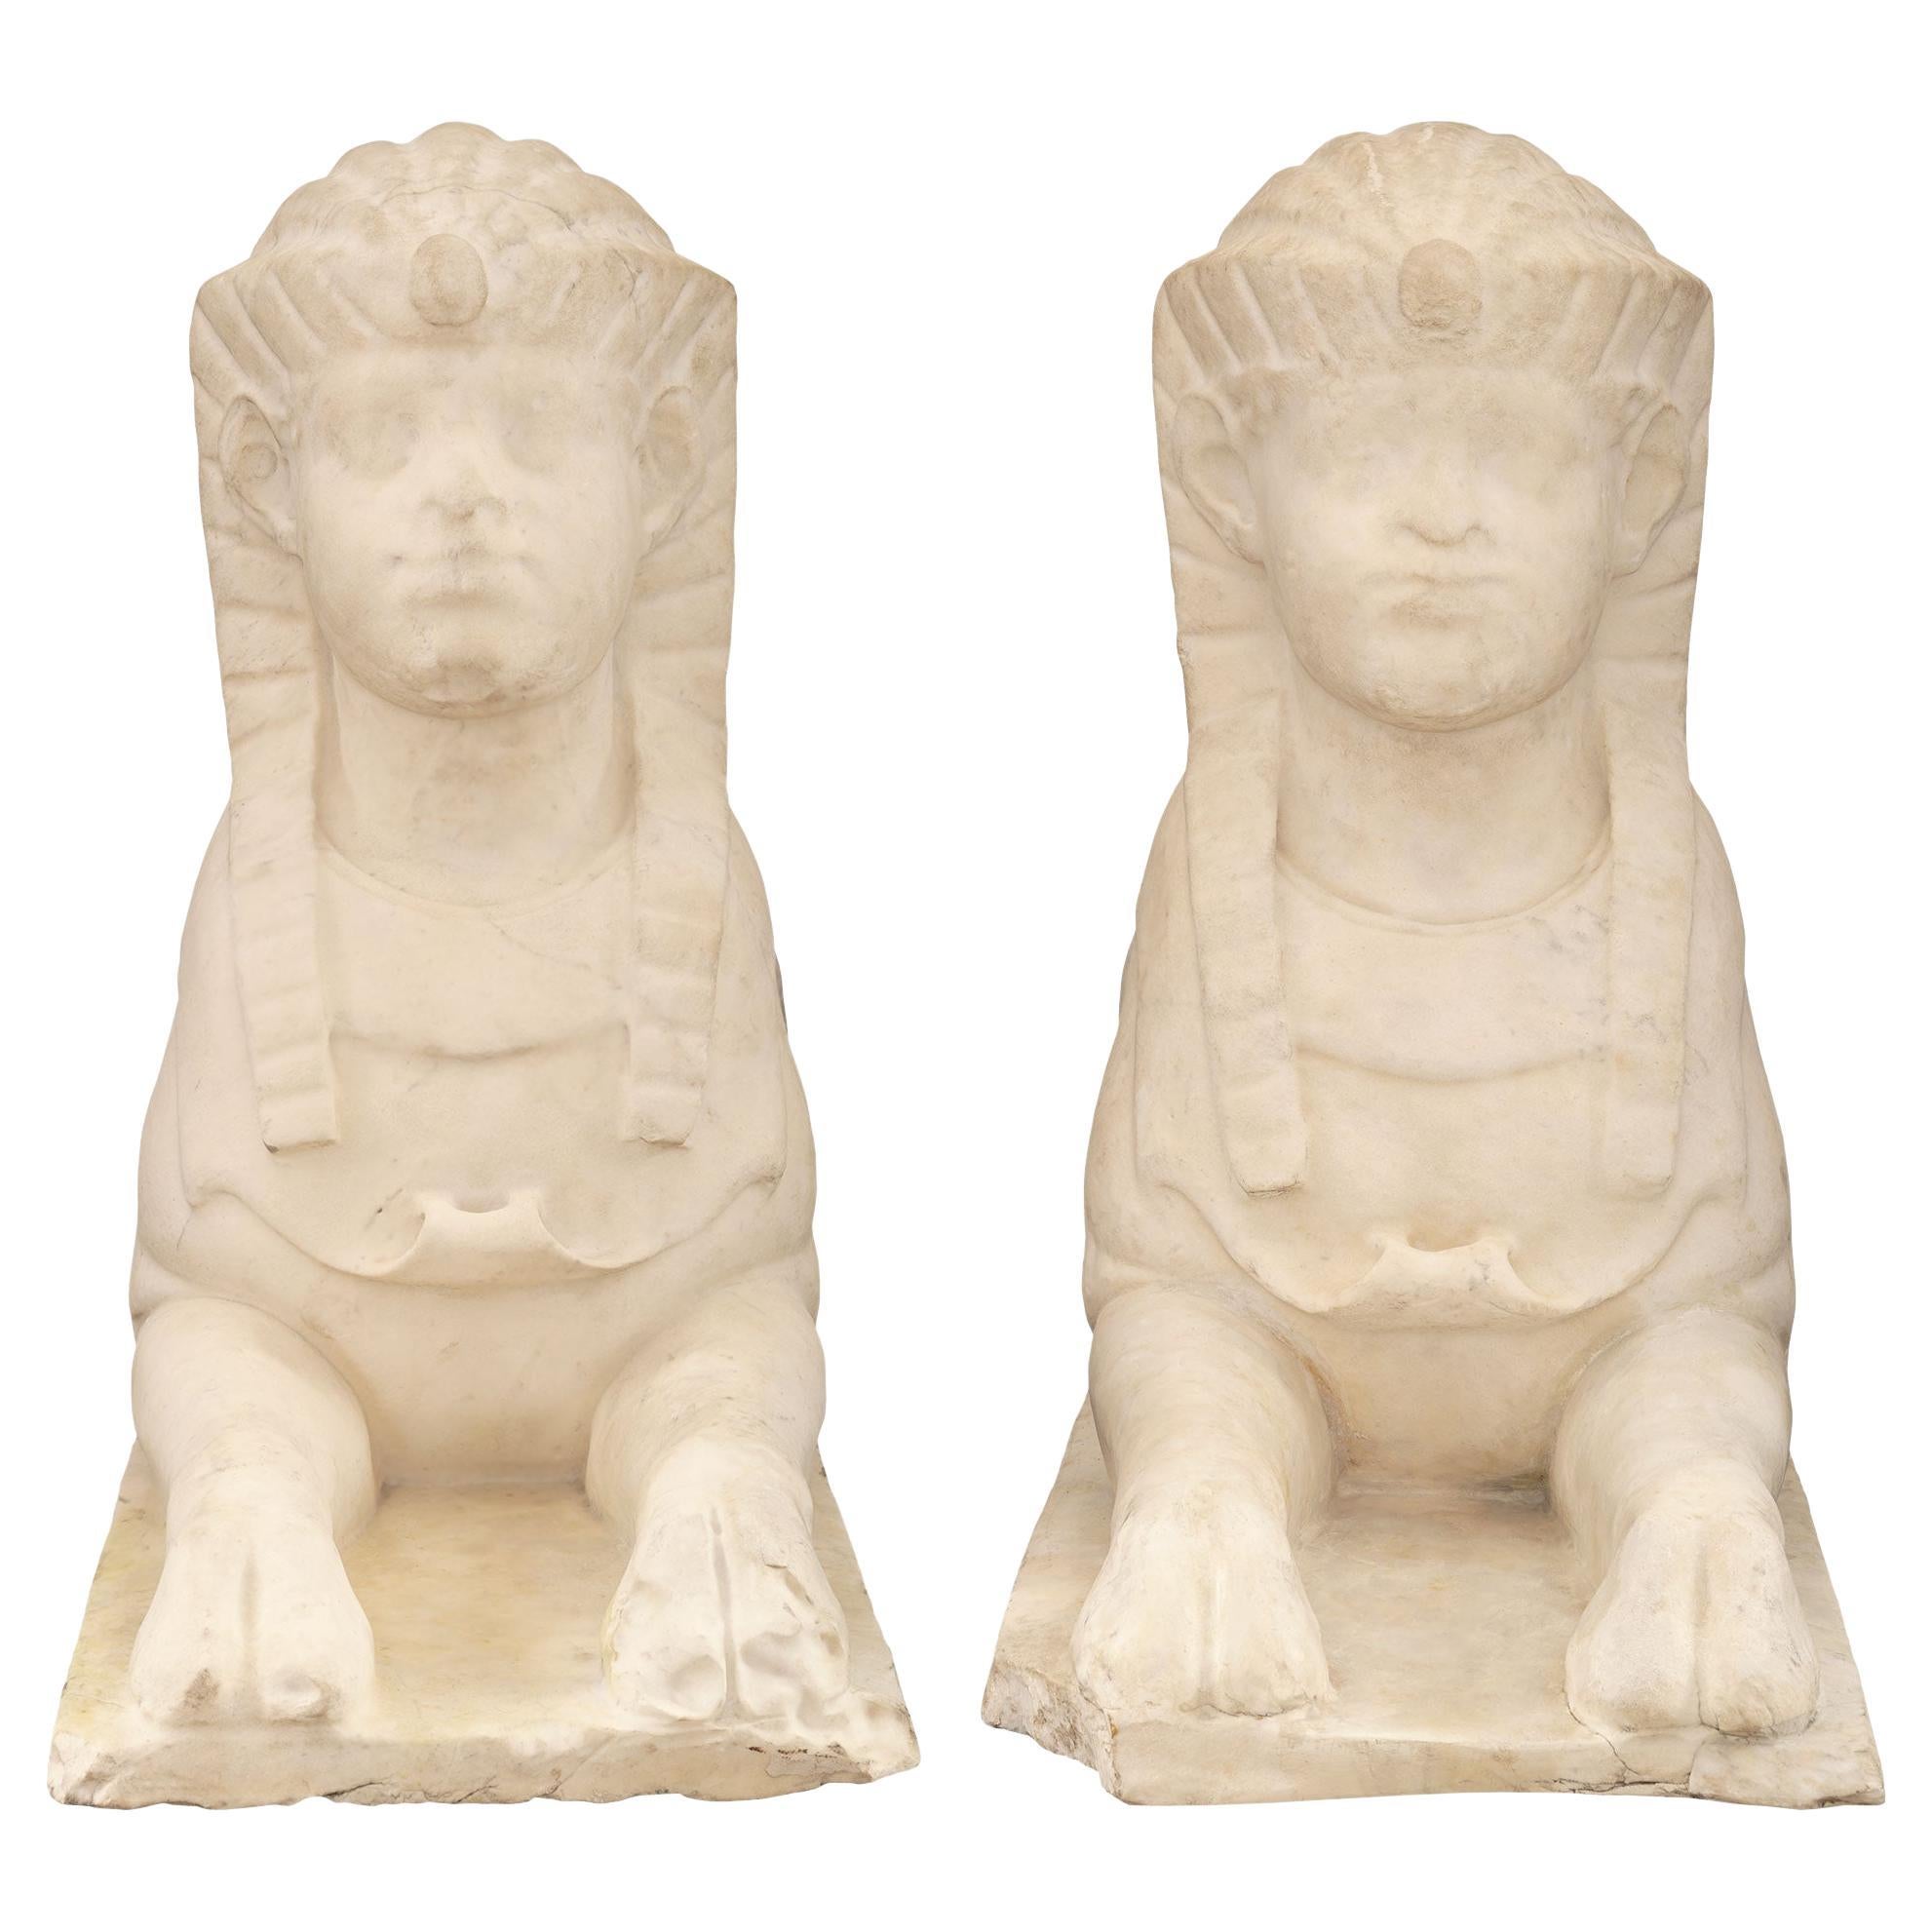 An impressive pair of Italian 19th century Neo-Classical st. white Carrara marble statues of Egyptian Sphinxes. Each Sphinx is sculpted out of one solid piece of marble and is raised by a rectangular base. Each is poised in an elegant traditional